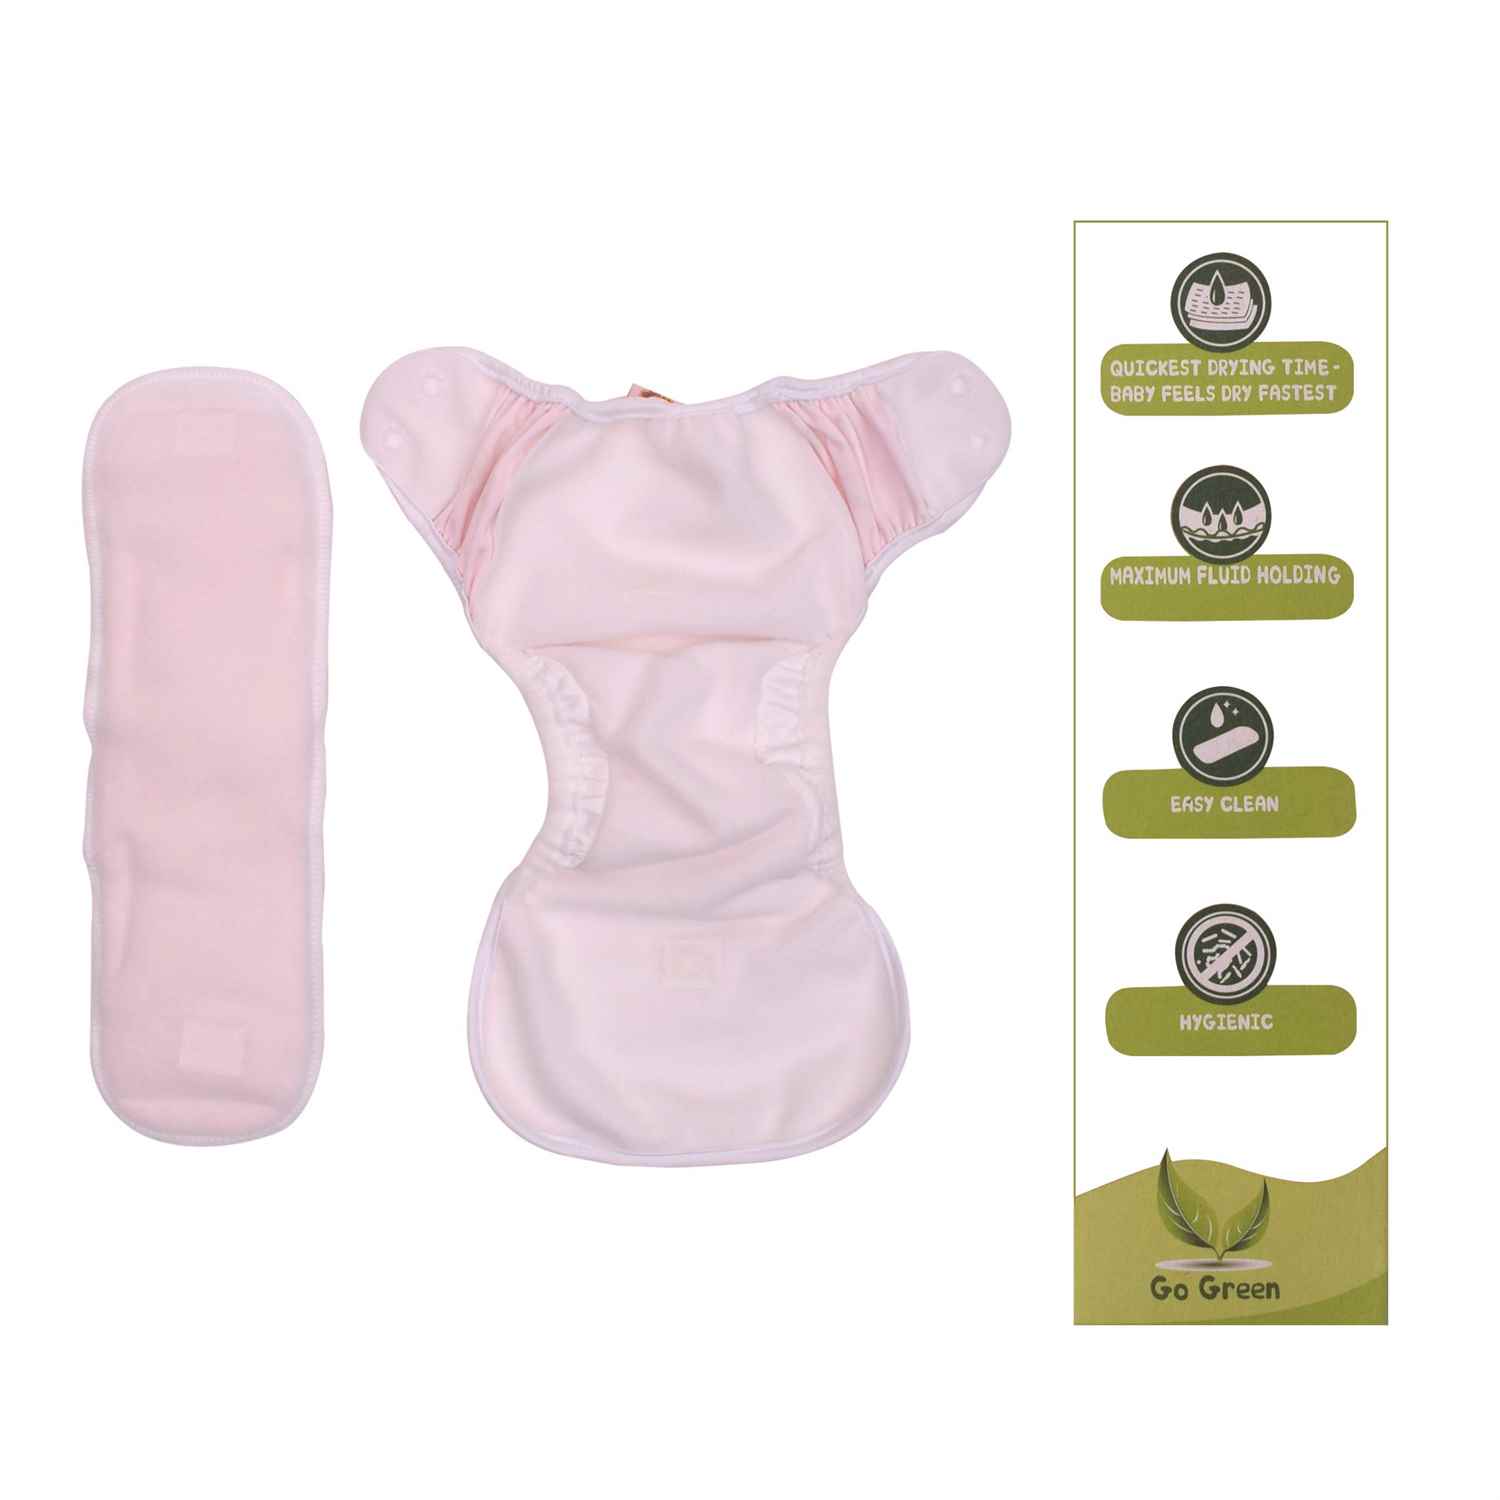 PAW PAW Baby Reusable Fabric Diaper with Pad, Size M (5-9kg)-Pink